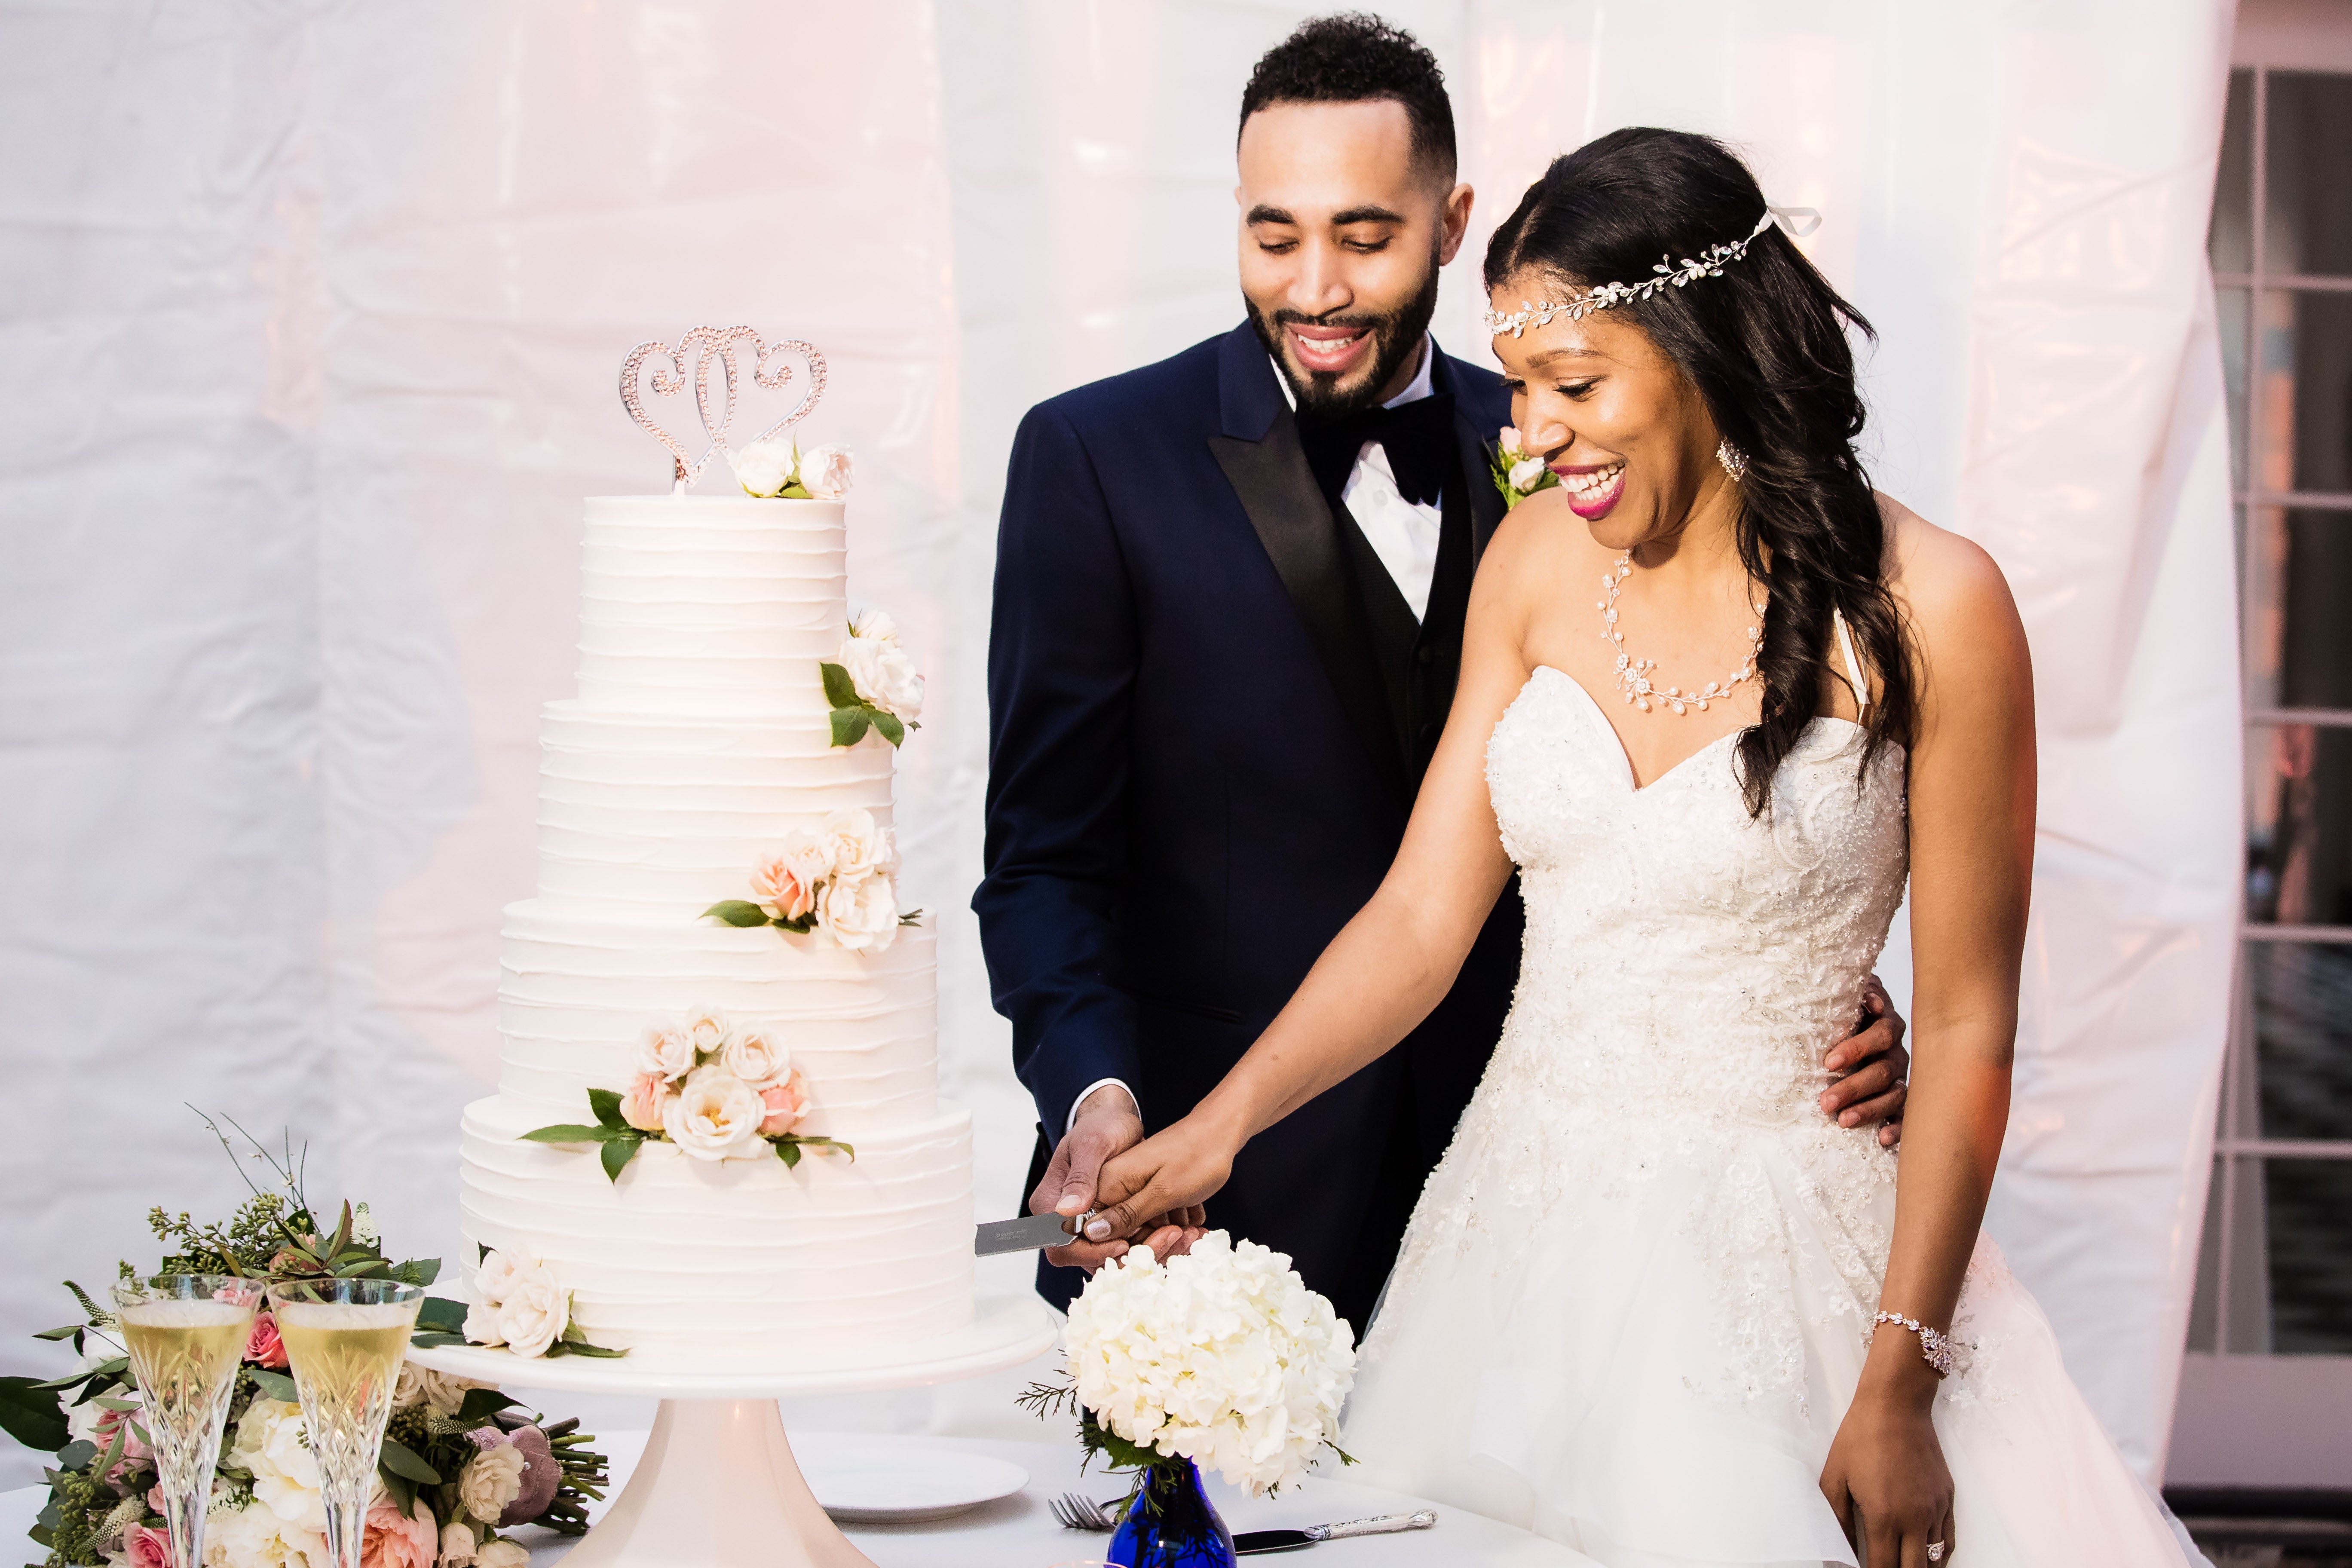 Bridal Bliss: Curtis And Aisha's Wedding Was As Romantic As It Gets
